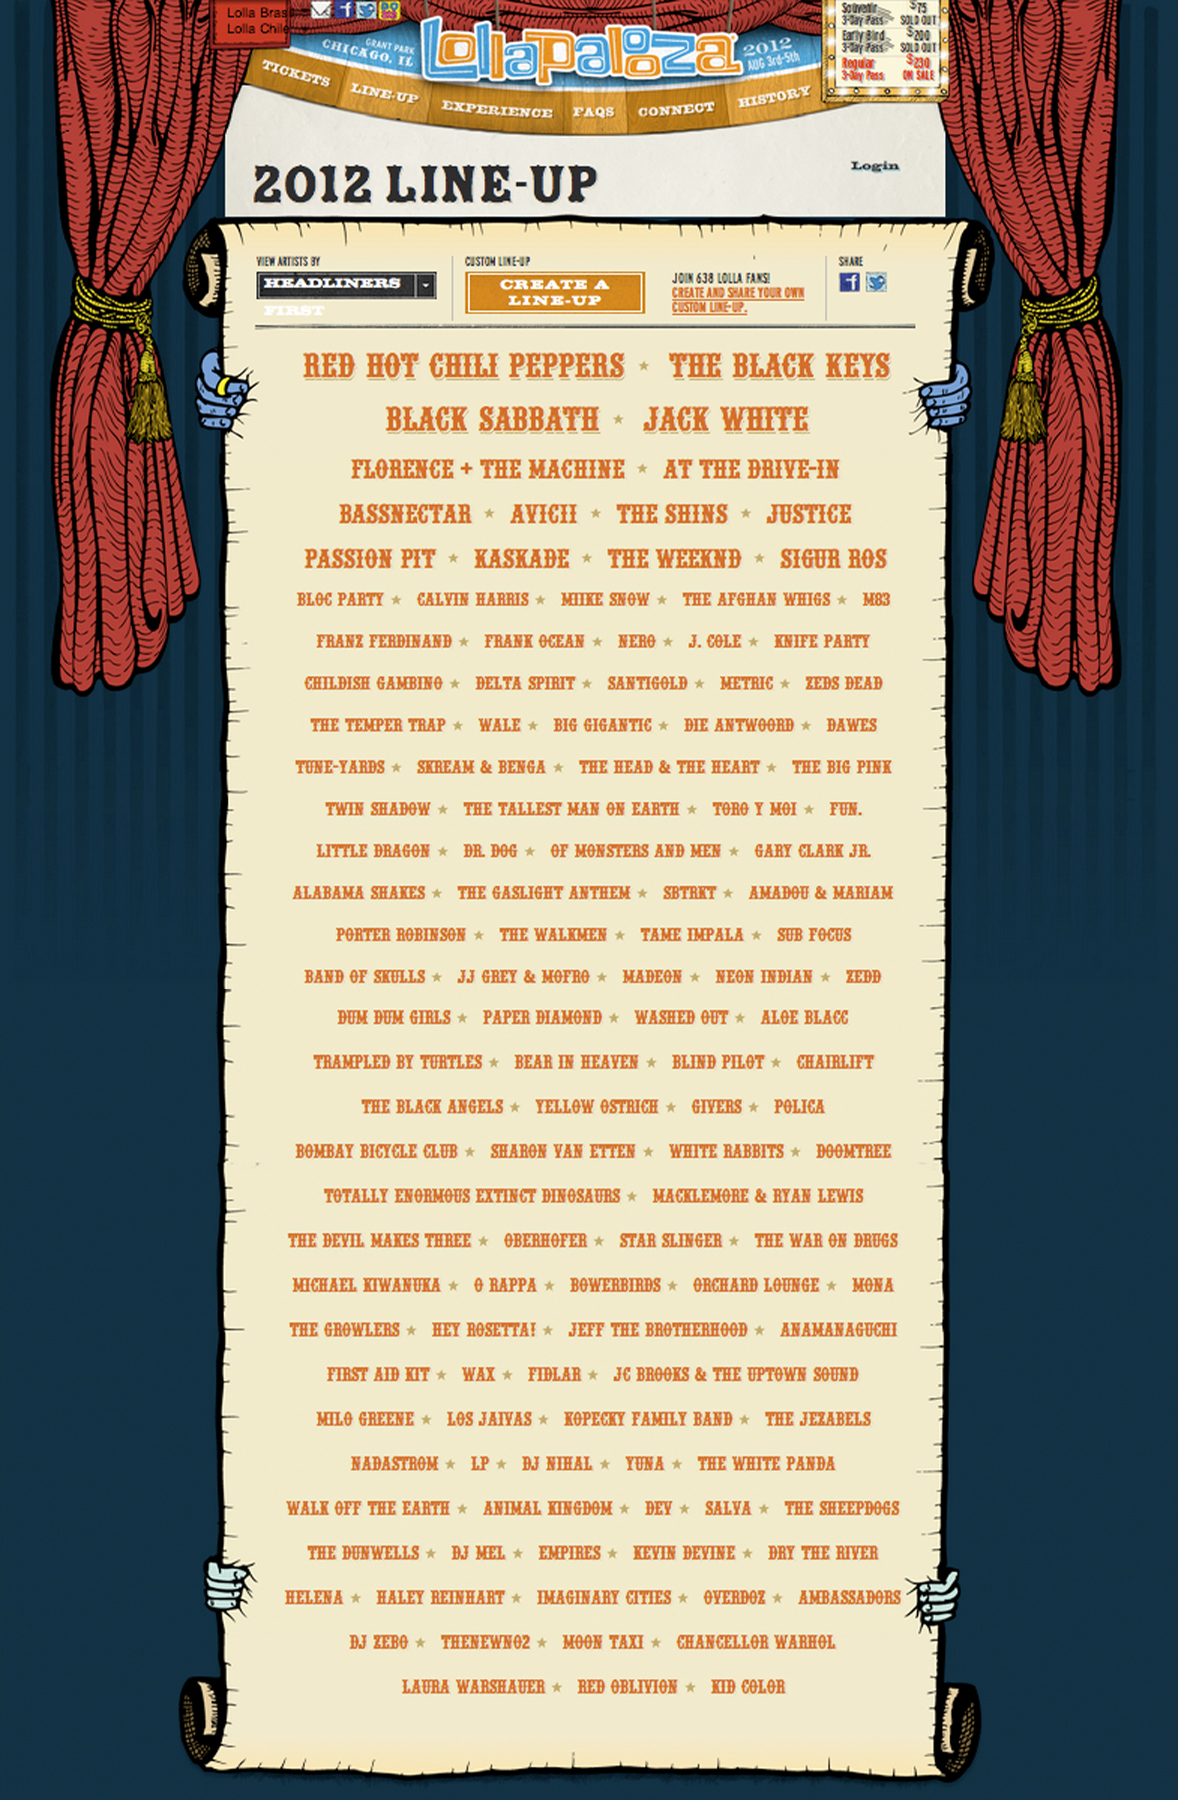 Lollapalooza 2012 Lineup released